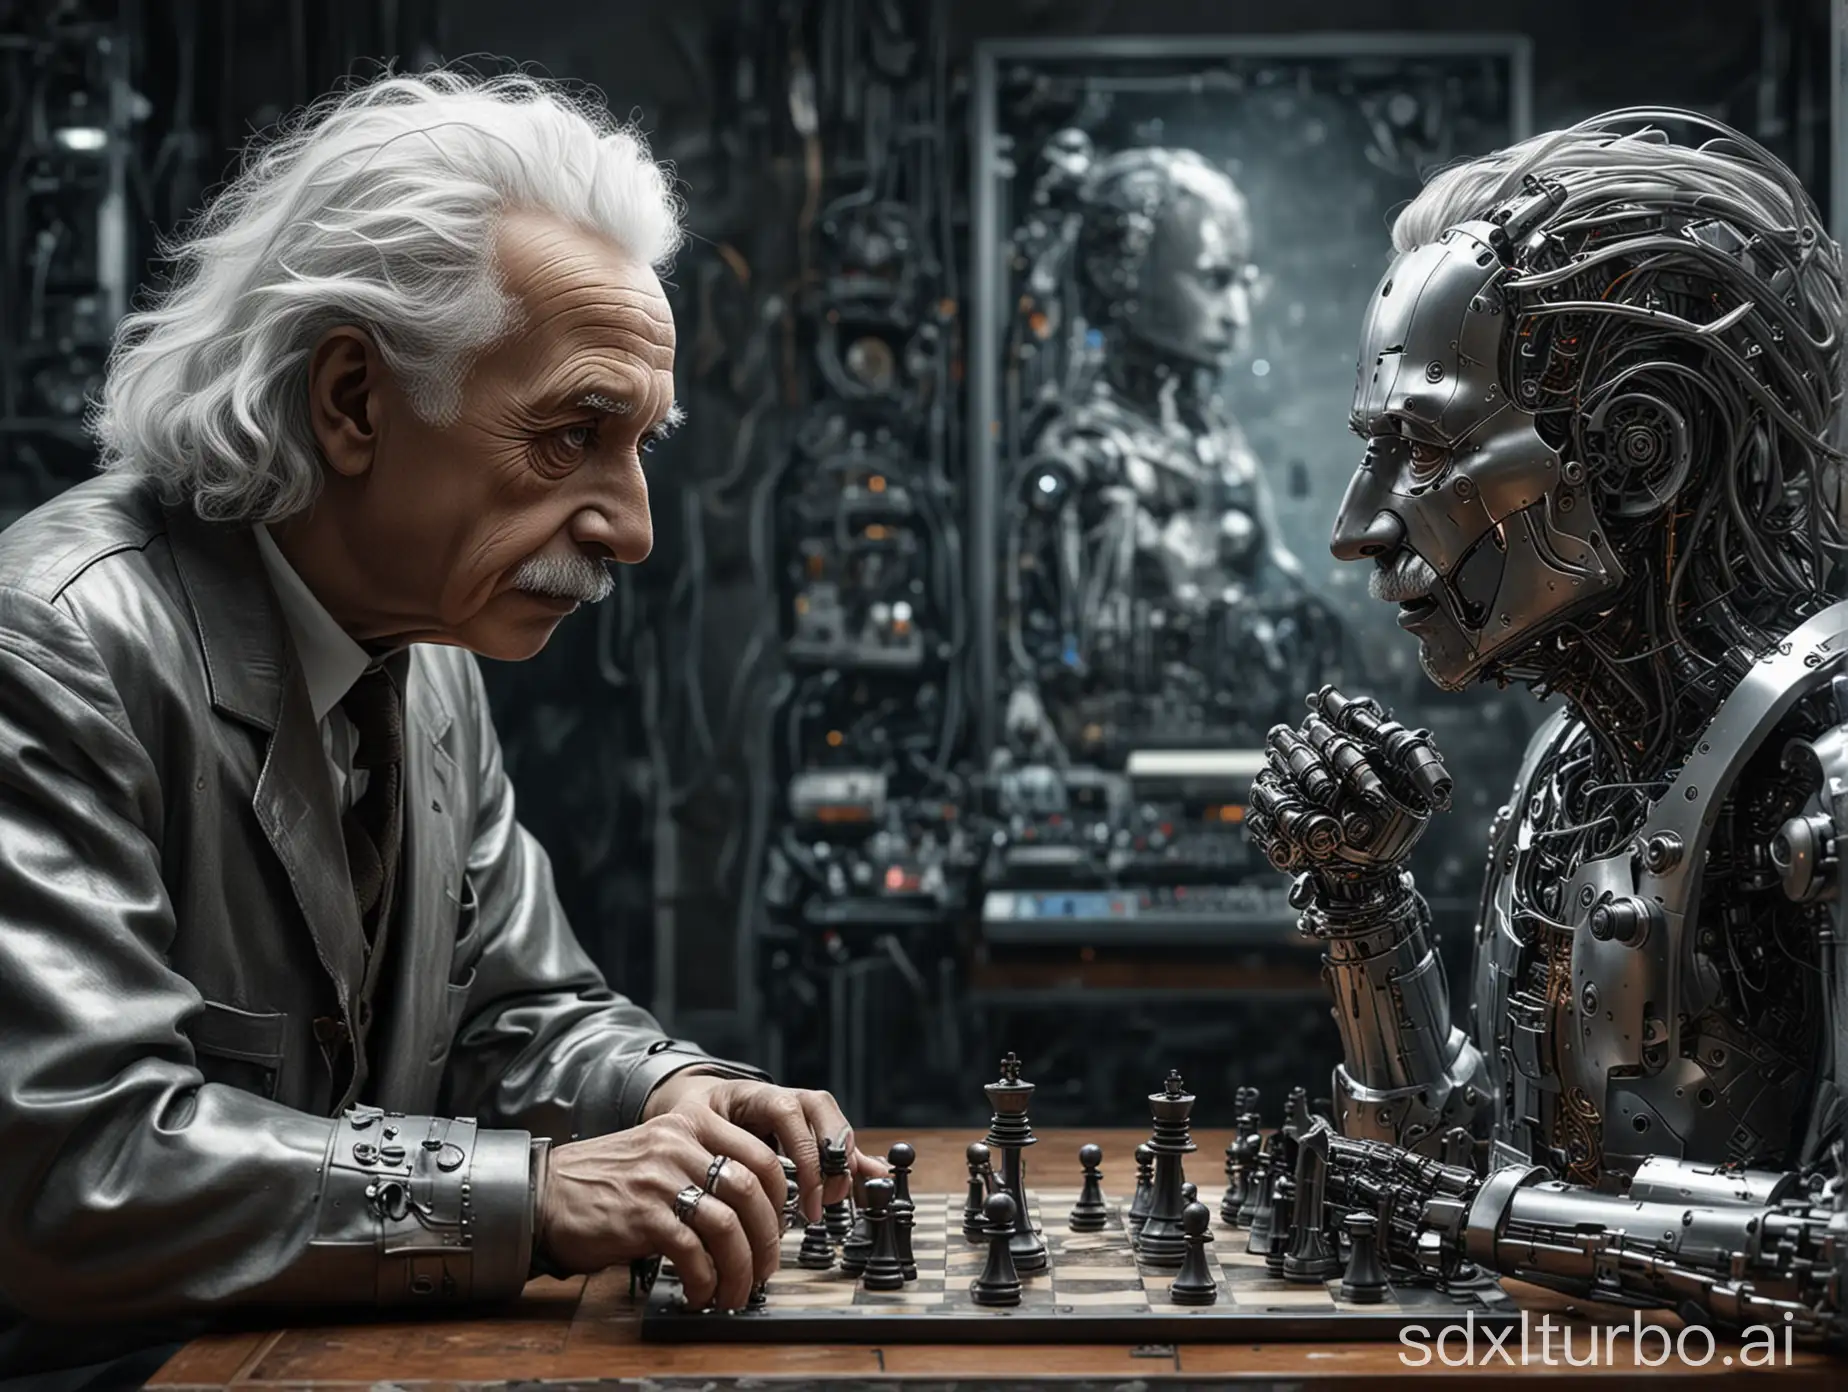 ["Albert Einstein plays chess against a highly modern metallic cyborg,","in the background a large futuristic computer,","very detailed, hyperrealistic"]